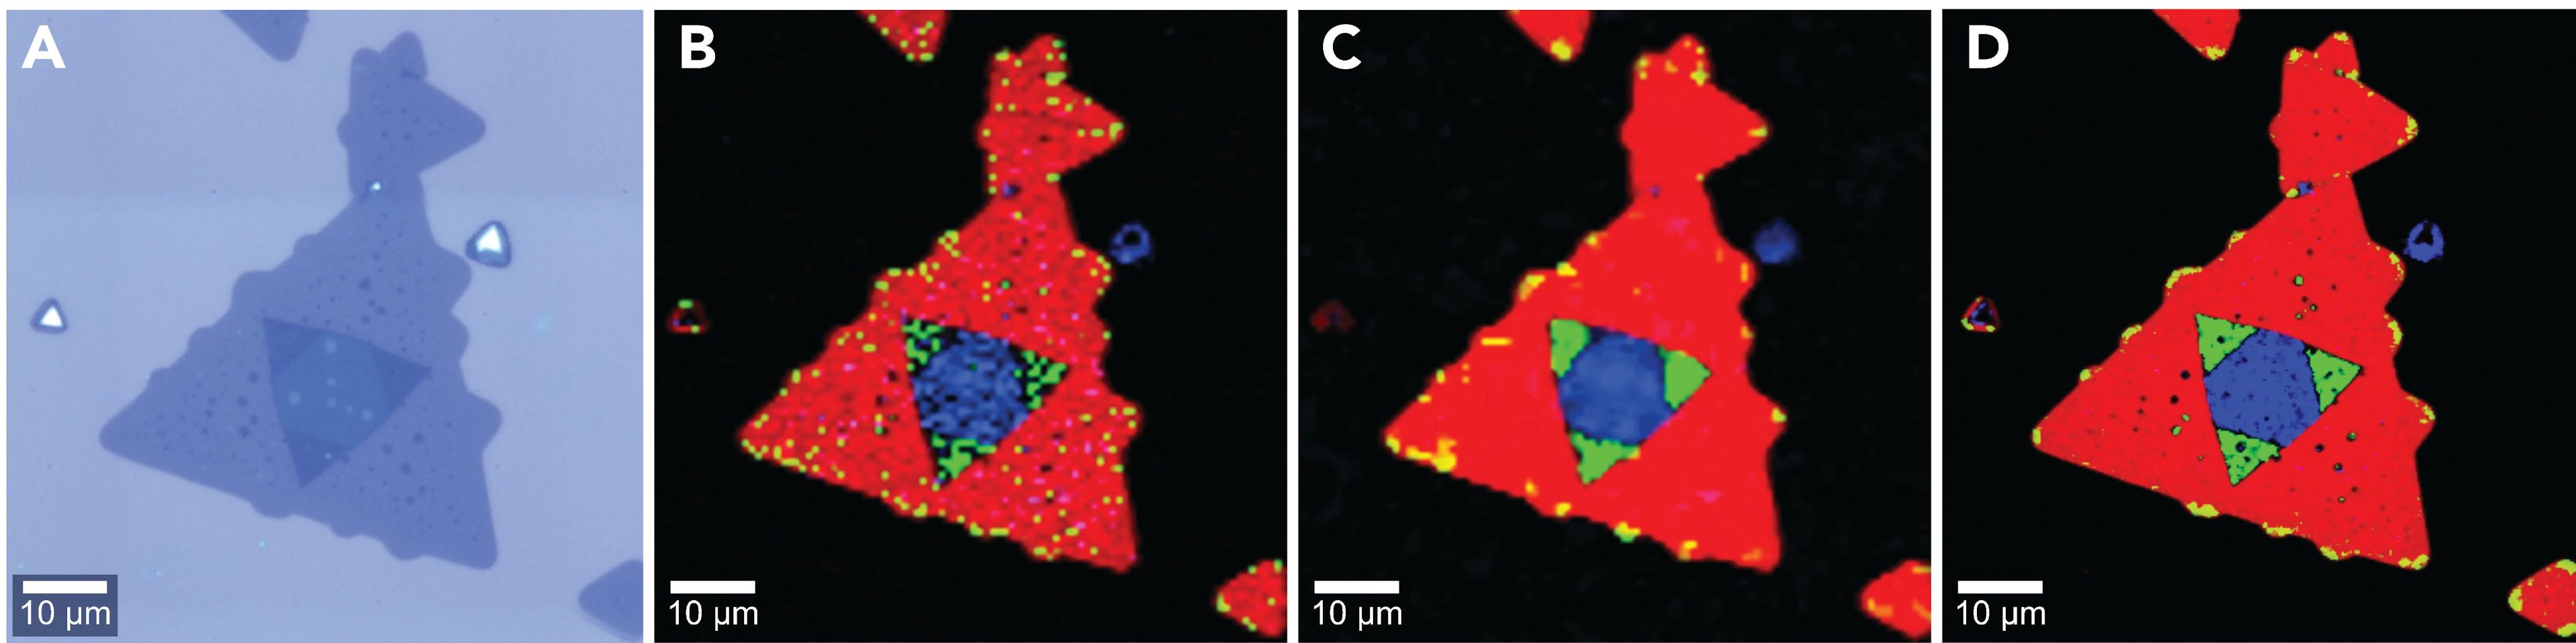 Figure 1: WSe2 flake A: White light image. B: Raman image of 10,000 spectra acquired in about 2 min. C: Smoothed version of B. D: Raman image of 102,400 spectra acquired in about 17 min. Color code: single-layer (red), bi-layer (green), multi-layer (blue).